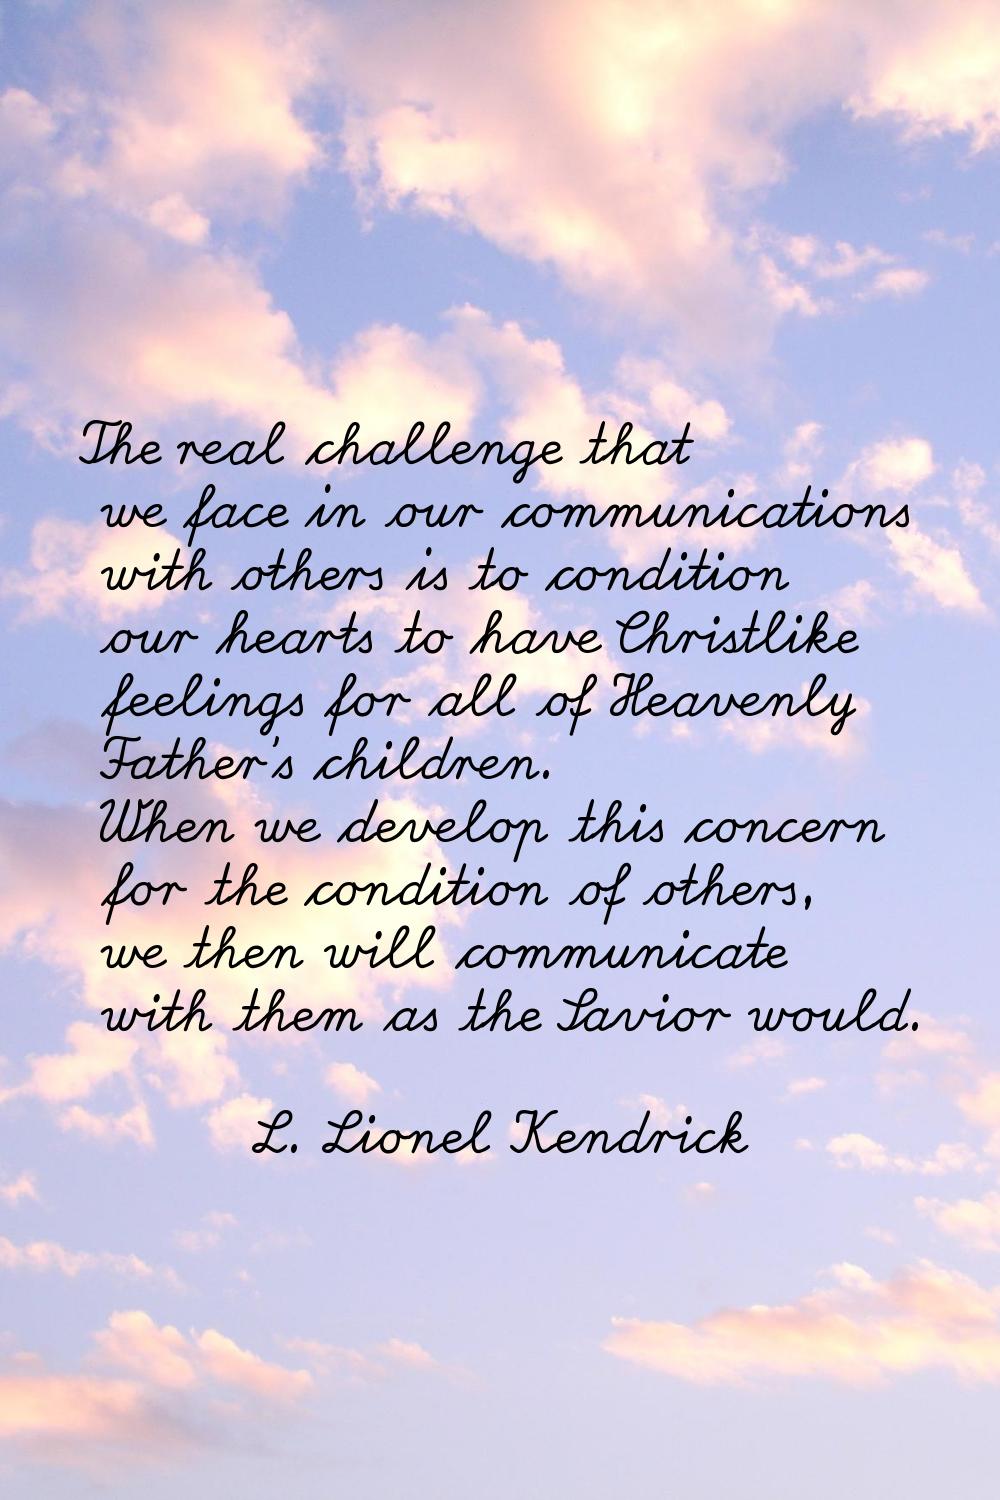 The real challenge that we face in our communications with others is to condition our hearts to hav